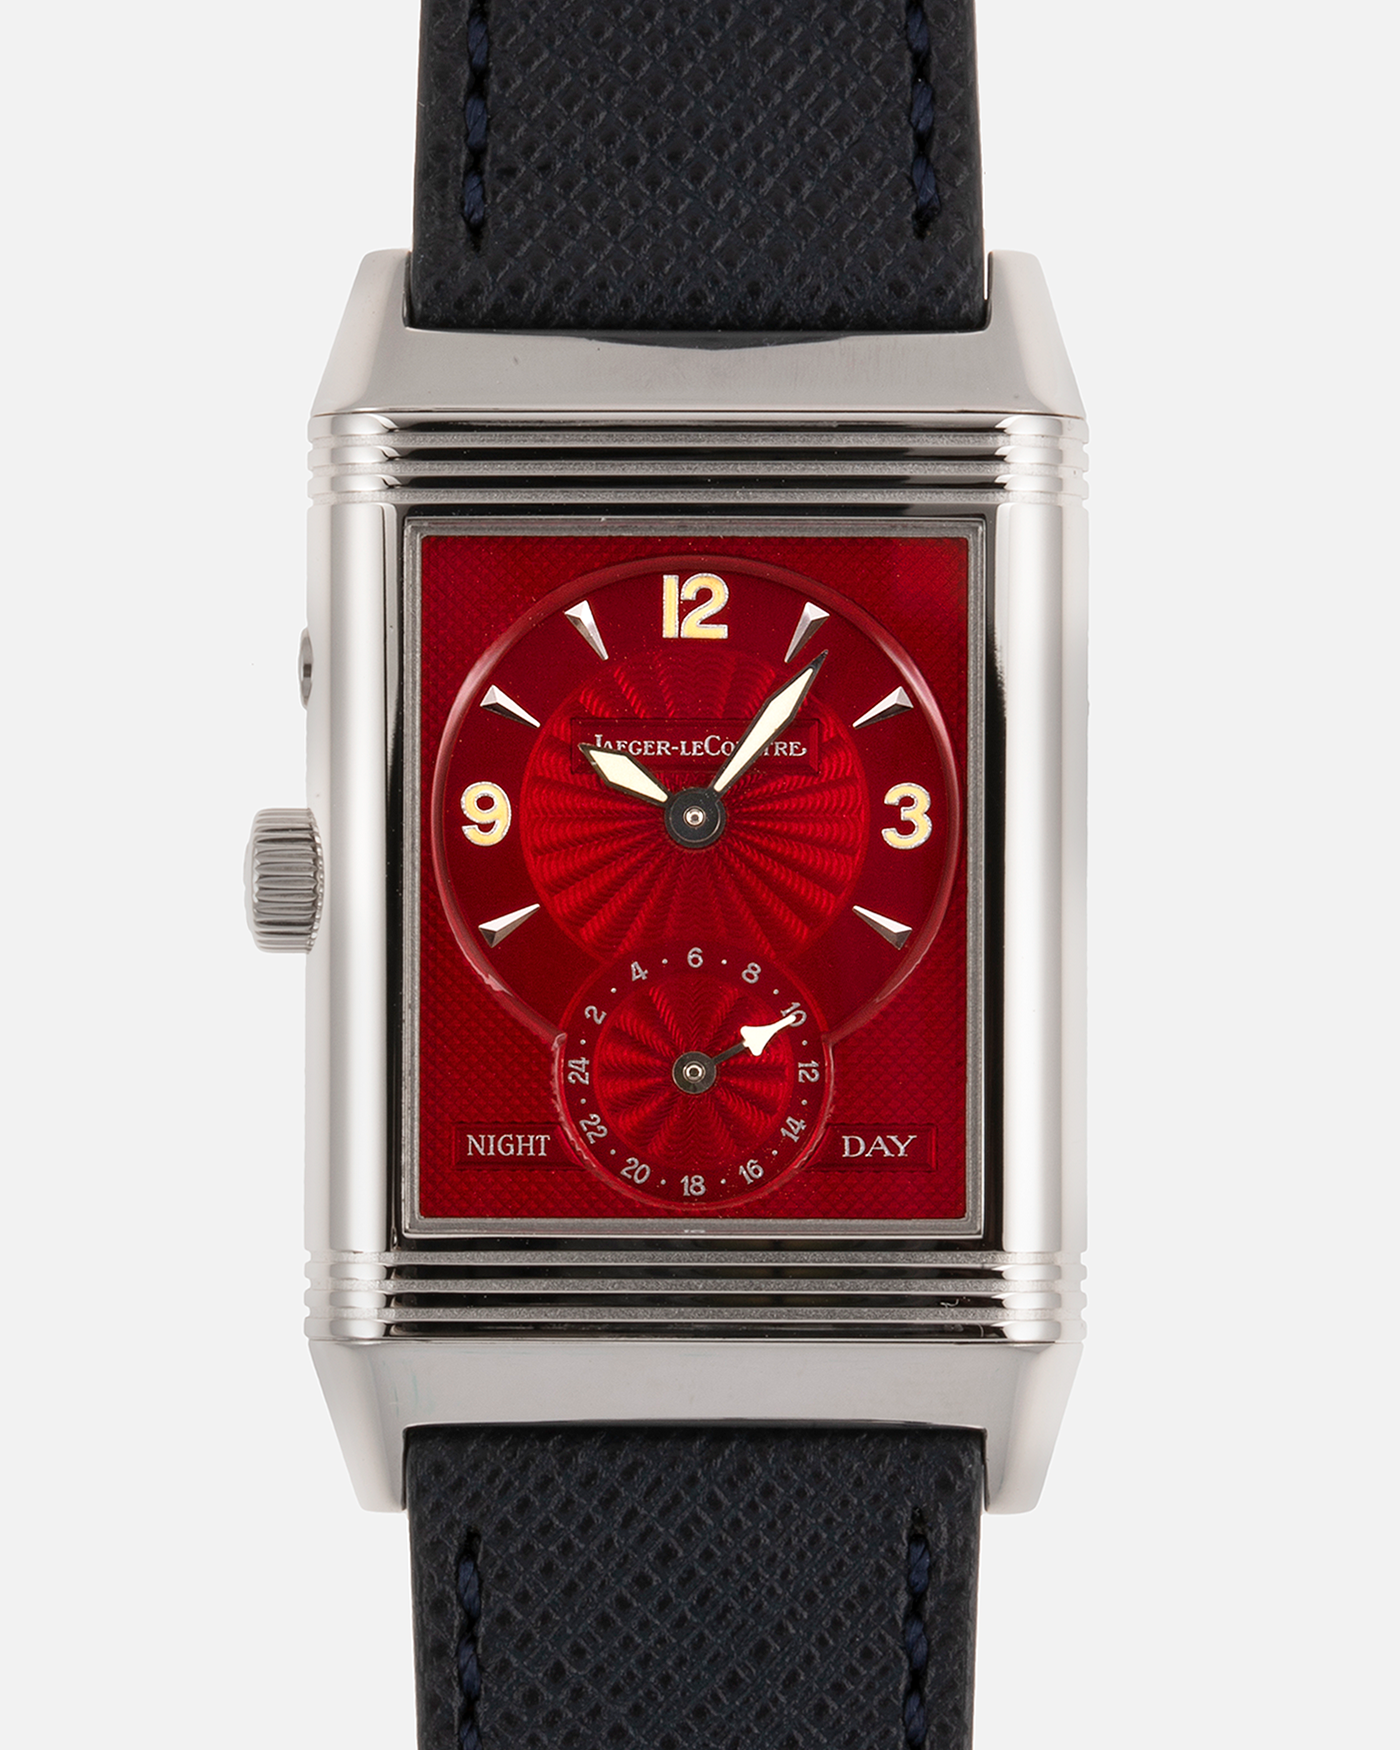 Brand: Jaeger-LeCoultre Year: 2000’s Model: Reverso Duoface Japan Edition Red, Ref. 270.1.54 Material: Stainless Steel Movement: JLC Cal. 854, Manual-Wind Case Diameter: 42 x 26mm Bracelet/Strap: Molequin Black Textured Calf with Stainless Steel Tang Buckle